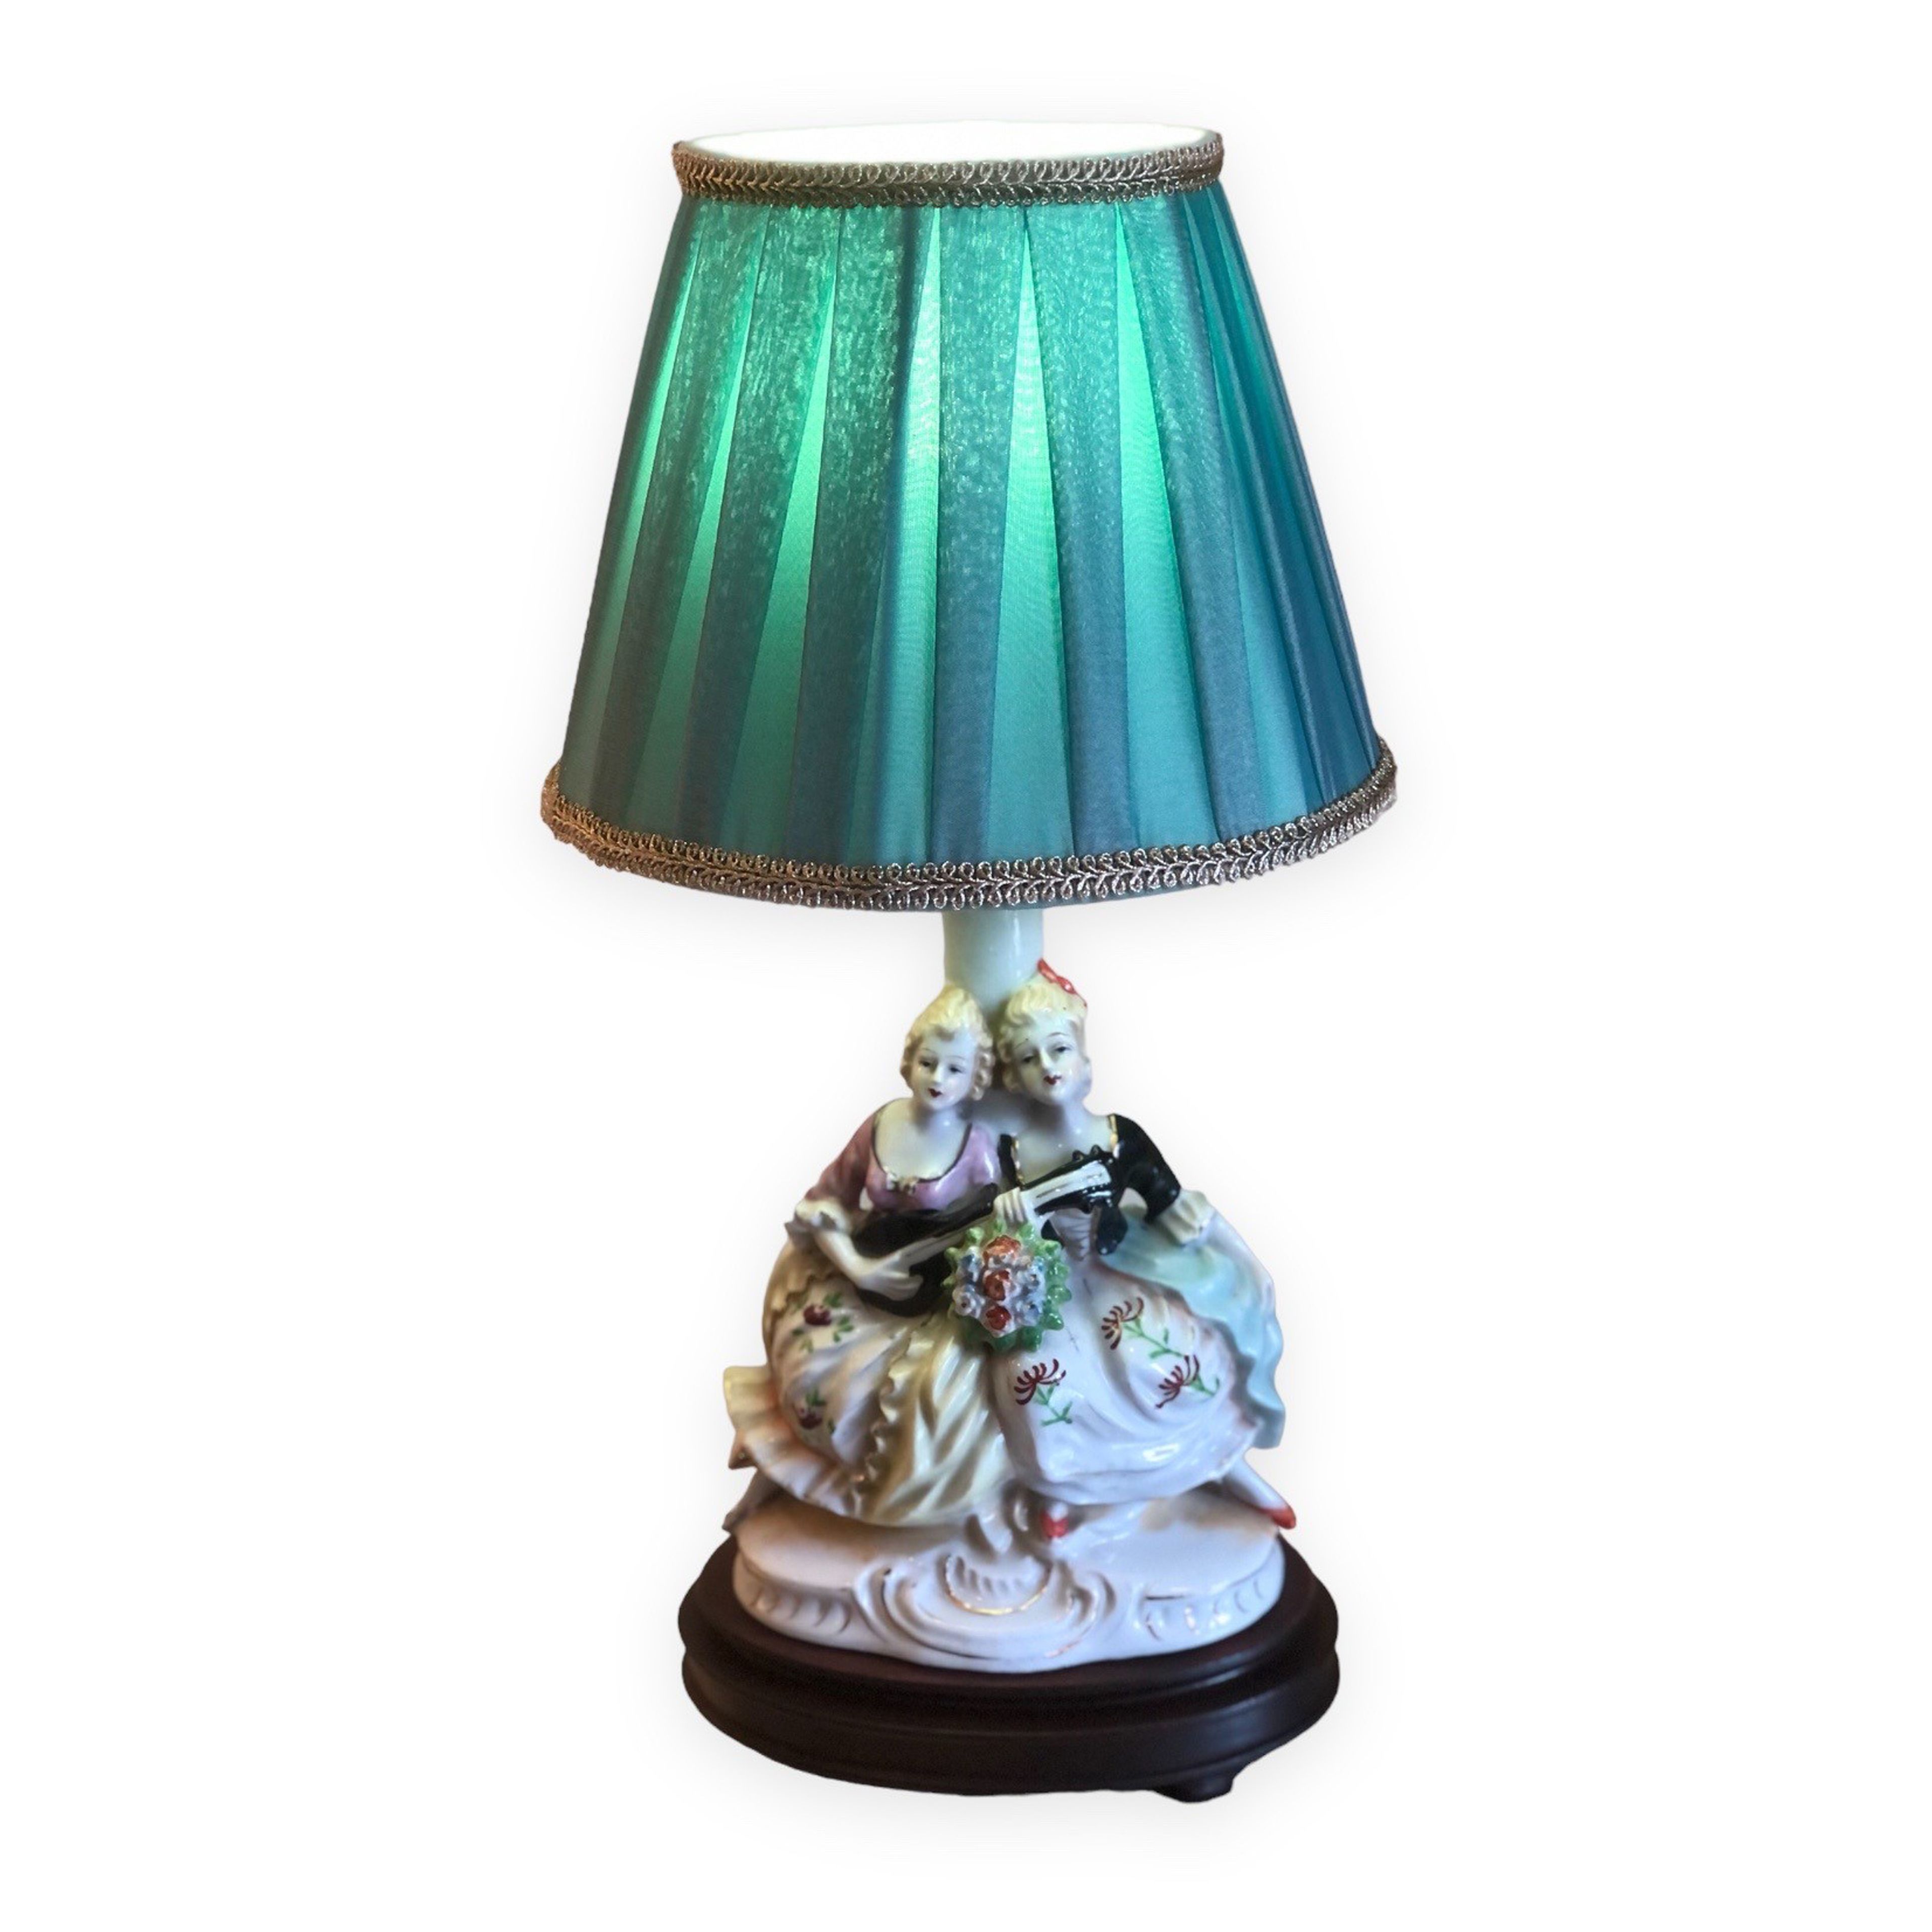 Classic Antique Handmade Lampshade with Modern Head (ceramic base)